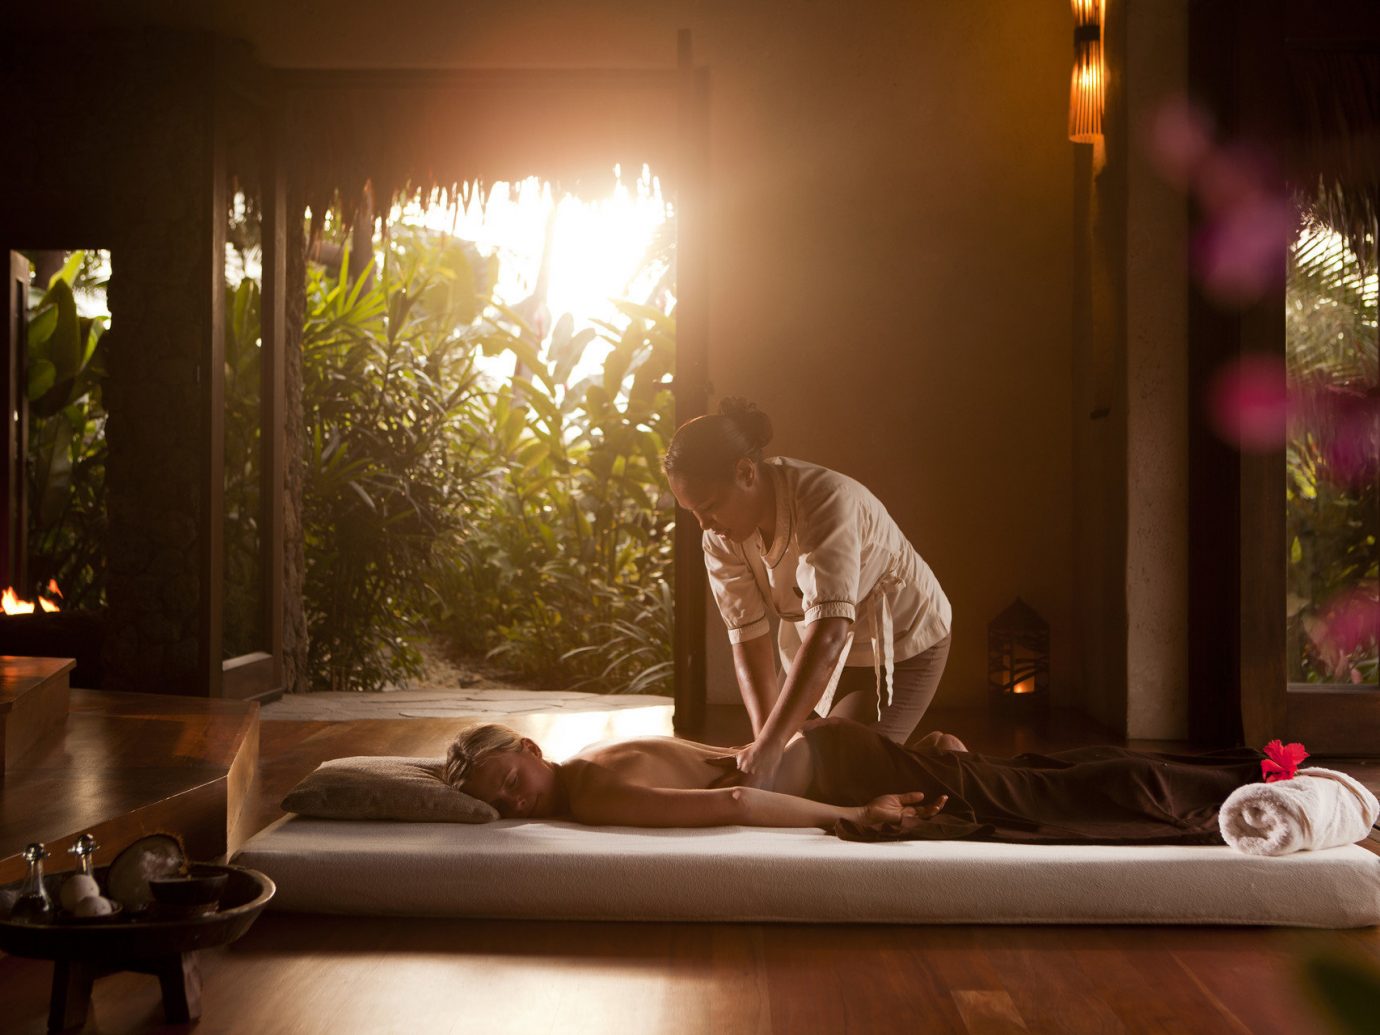 airy calm golden hour Health + Wellness isolation Luxury massage people private quaint relaxation relaxing remote serene Spa Spa Retreats sunlight Sunset Travel Tips Tropical man person interior design lighting living room